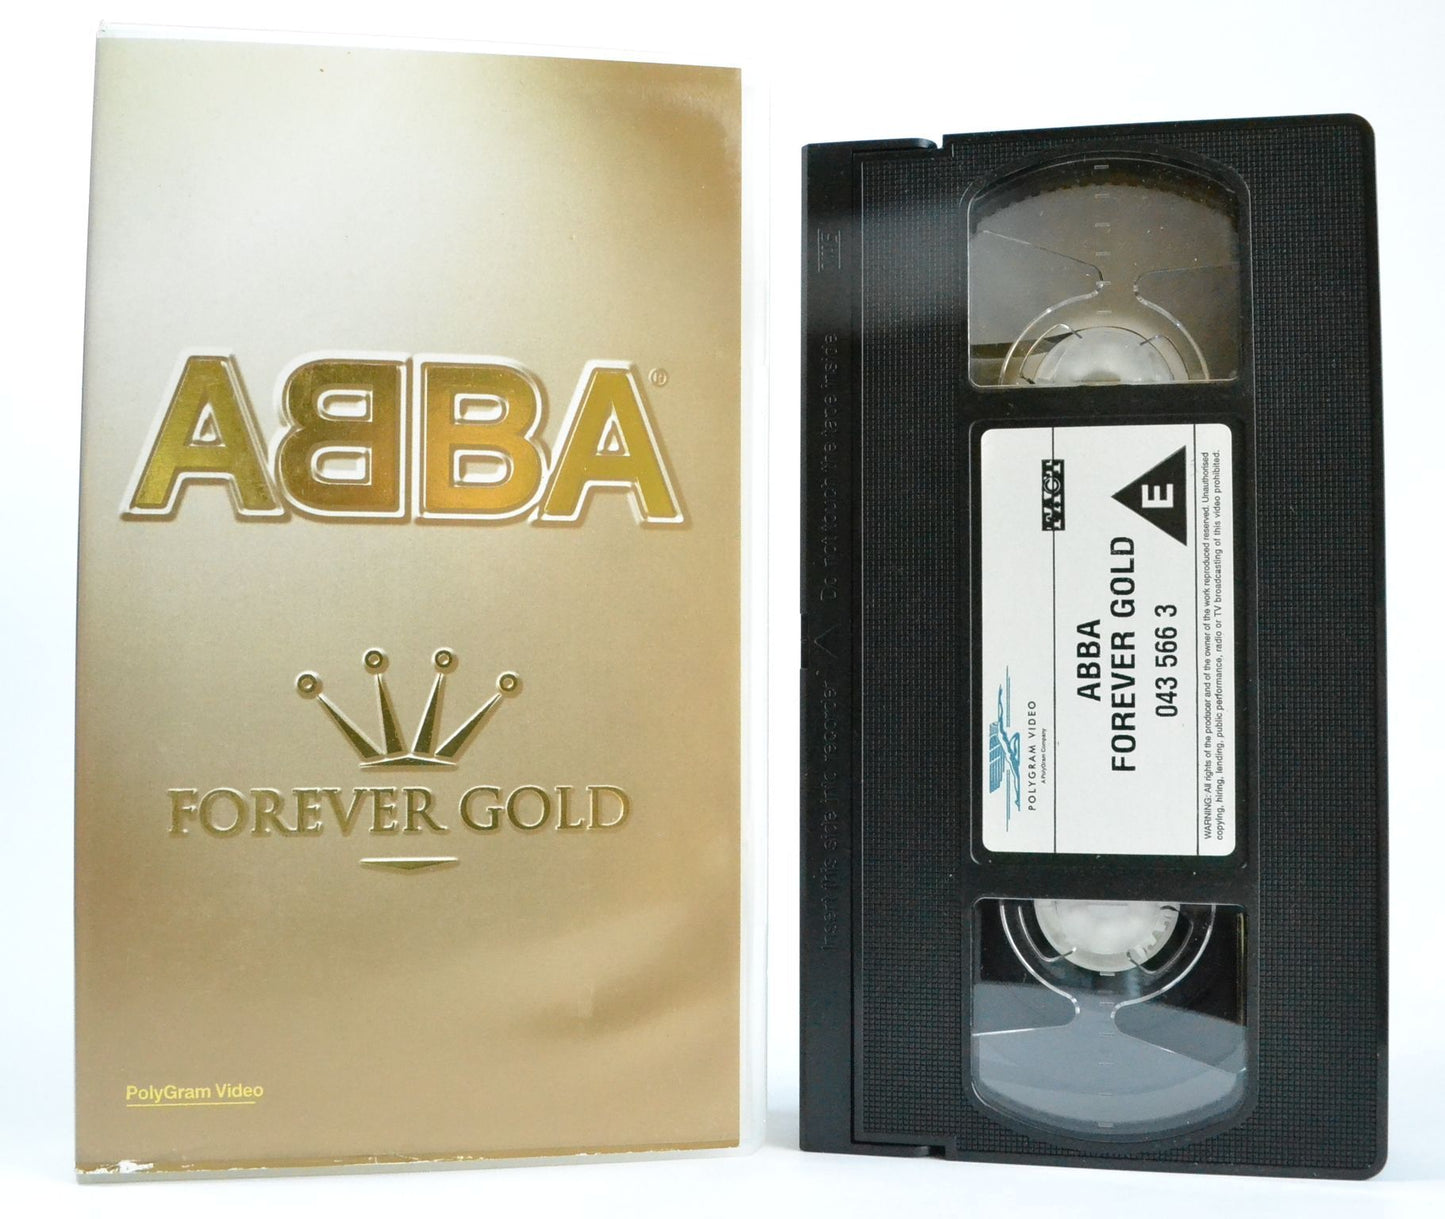 ABBA: Forever Gold (90 Minutes) 32 Tracks - Dancing Queen, That’s Me - VHS-